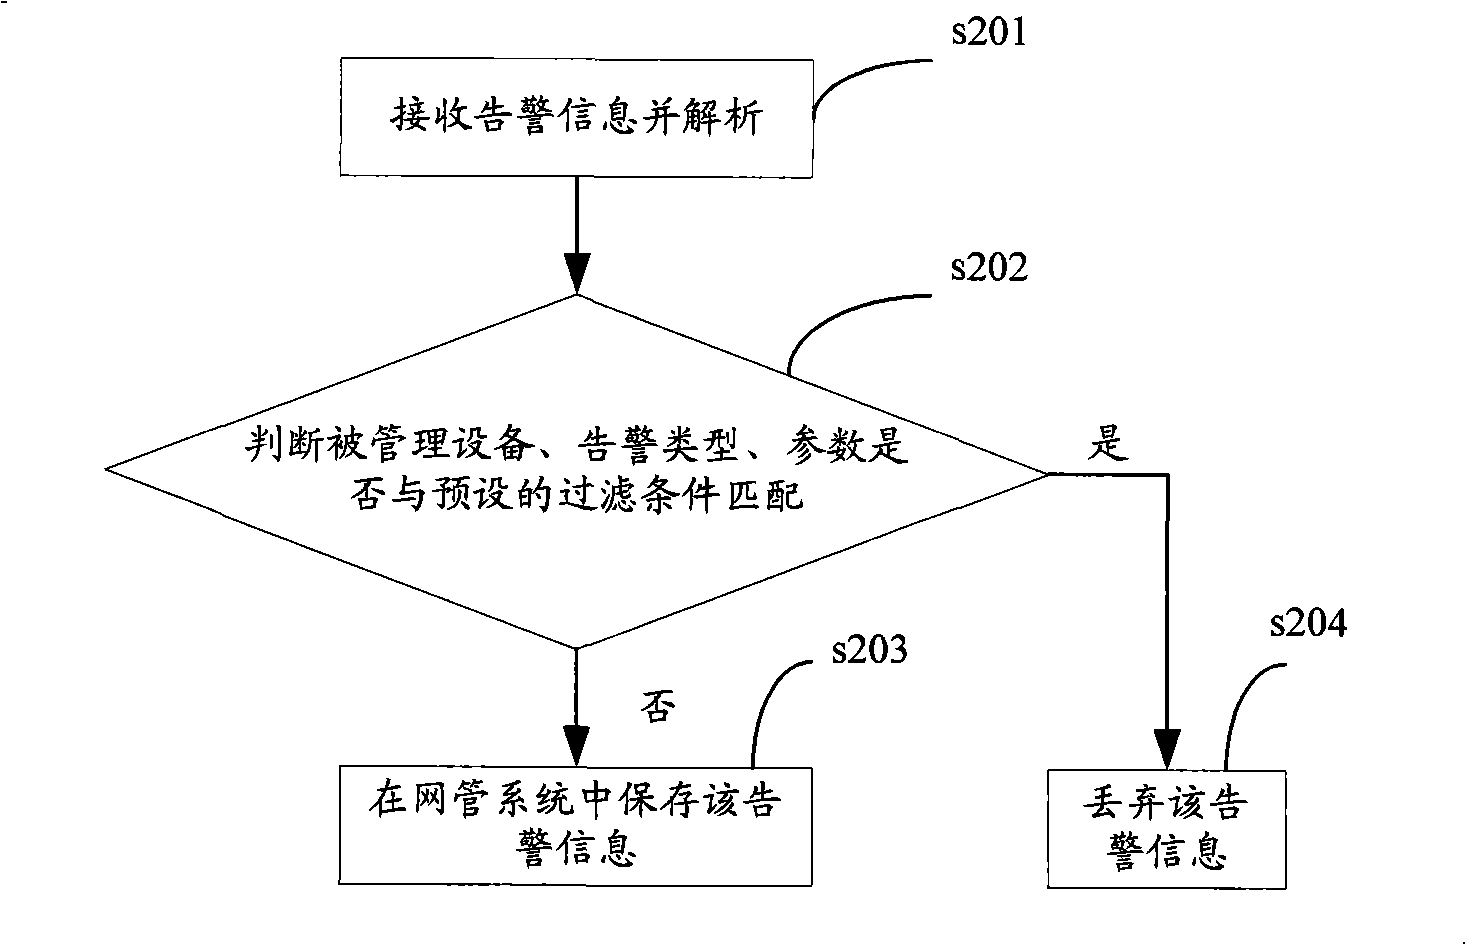 Alarm processing method and network management system